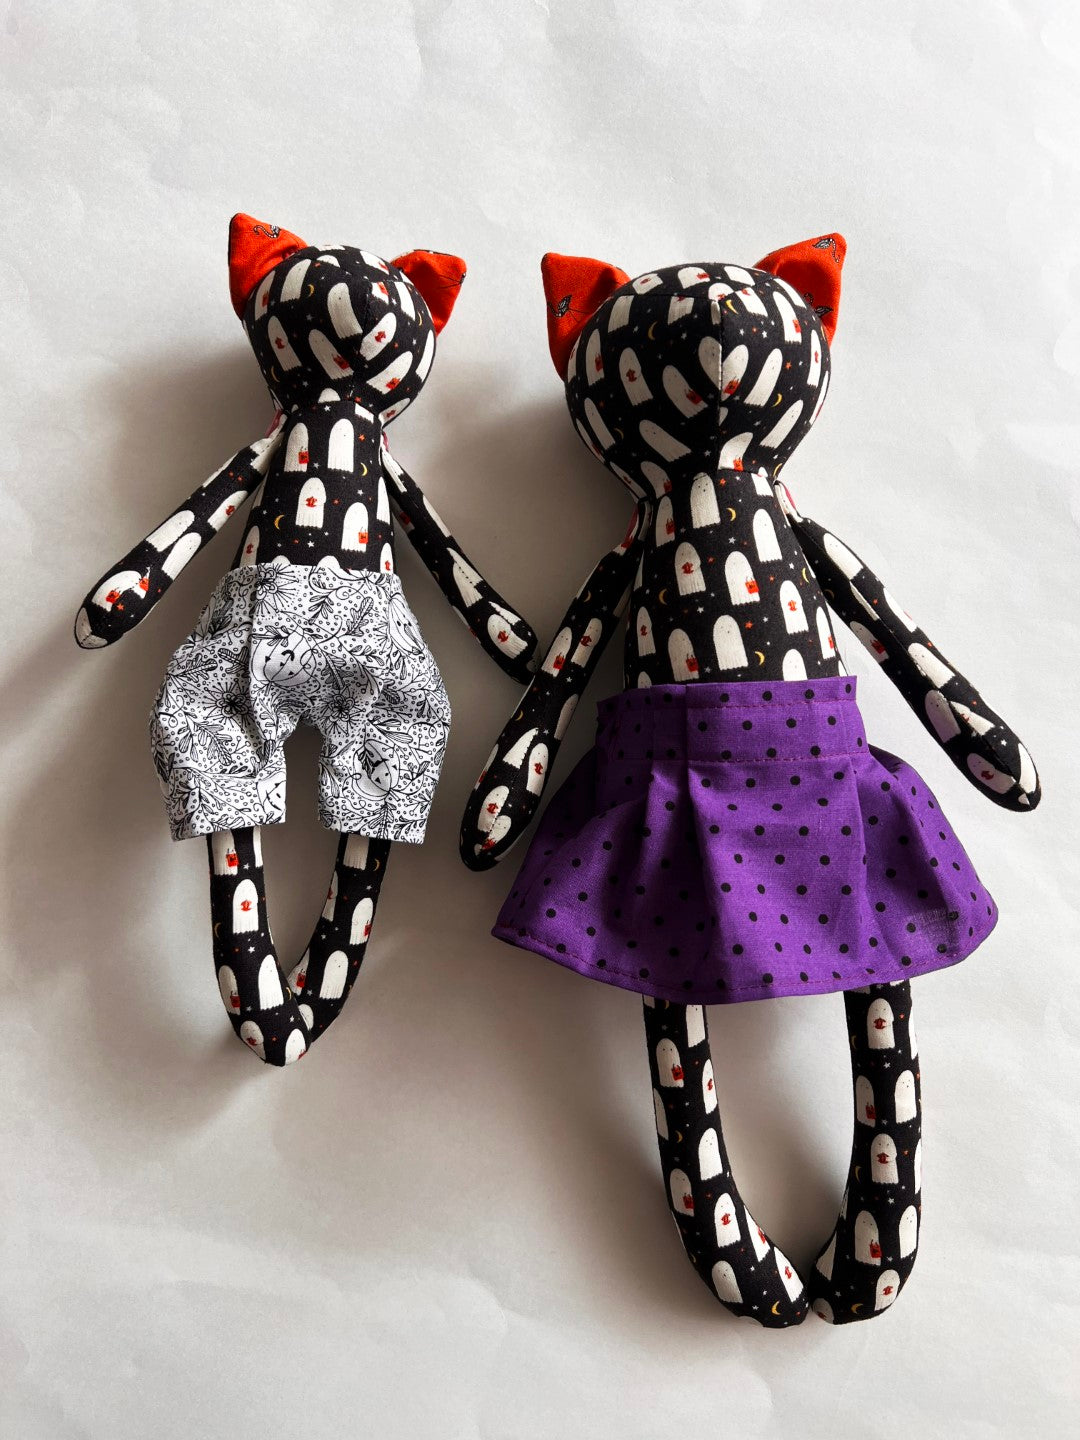 Kitty Cat Doll - Ghosts